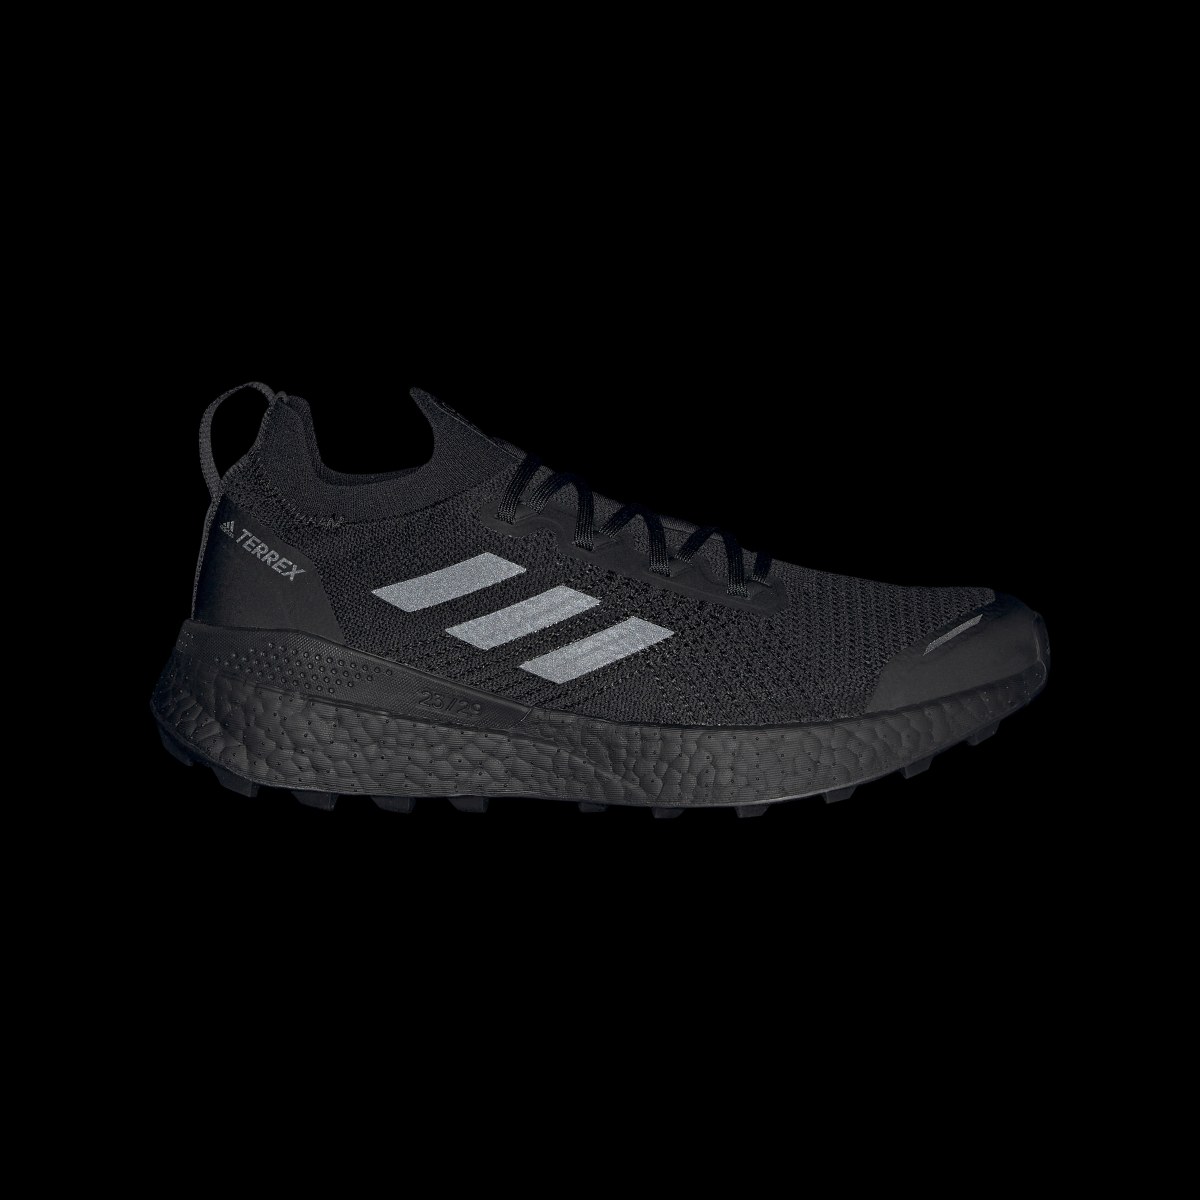 Adidas TERREX Two Ultra Trail Running Shoes. 8